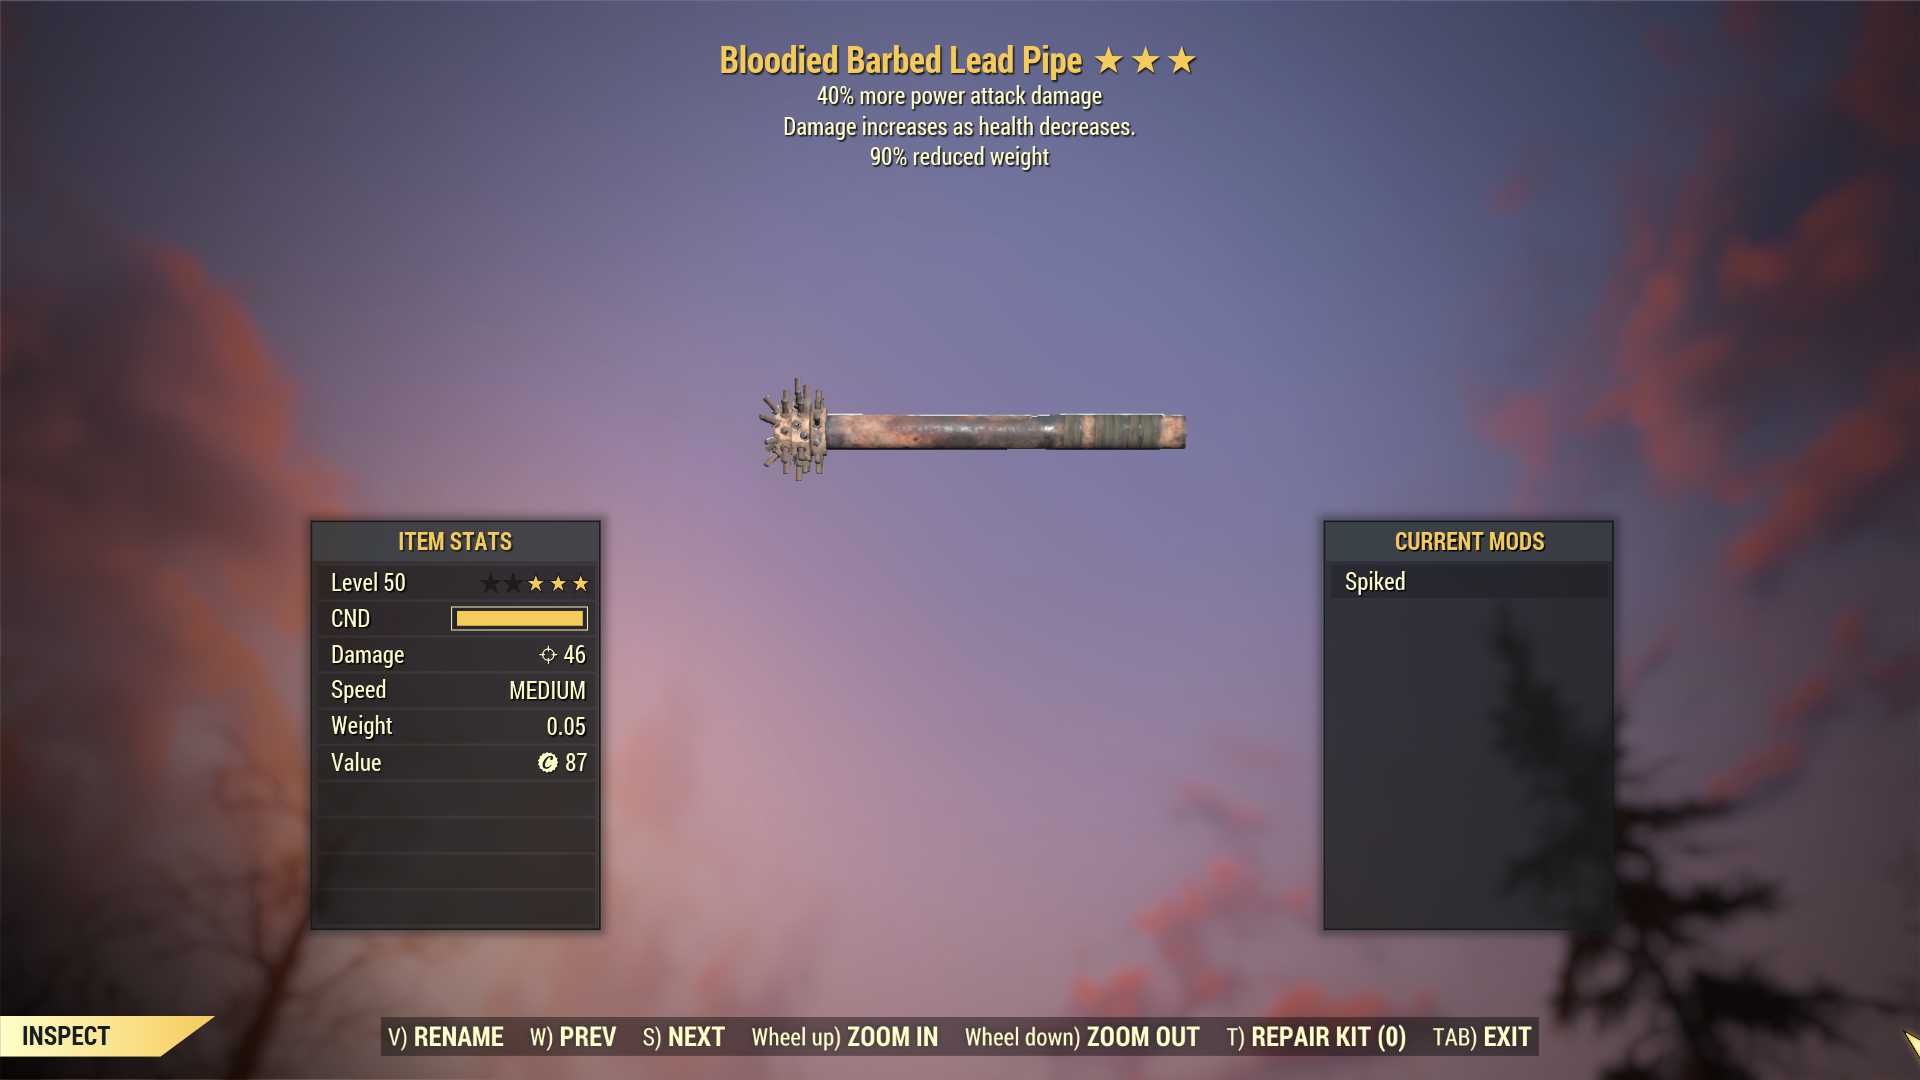 Bloodied Lead Pipe (+40% damage PA, 90% reduced weight)